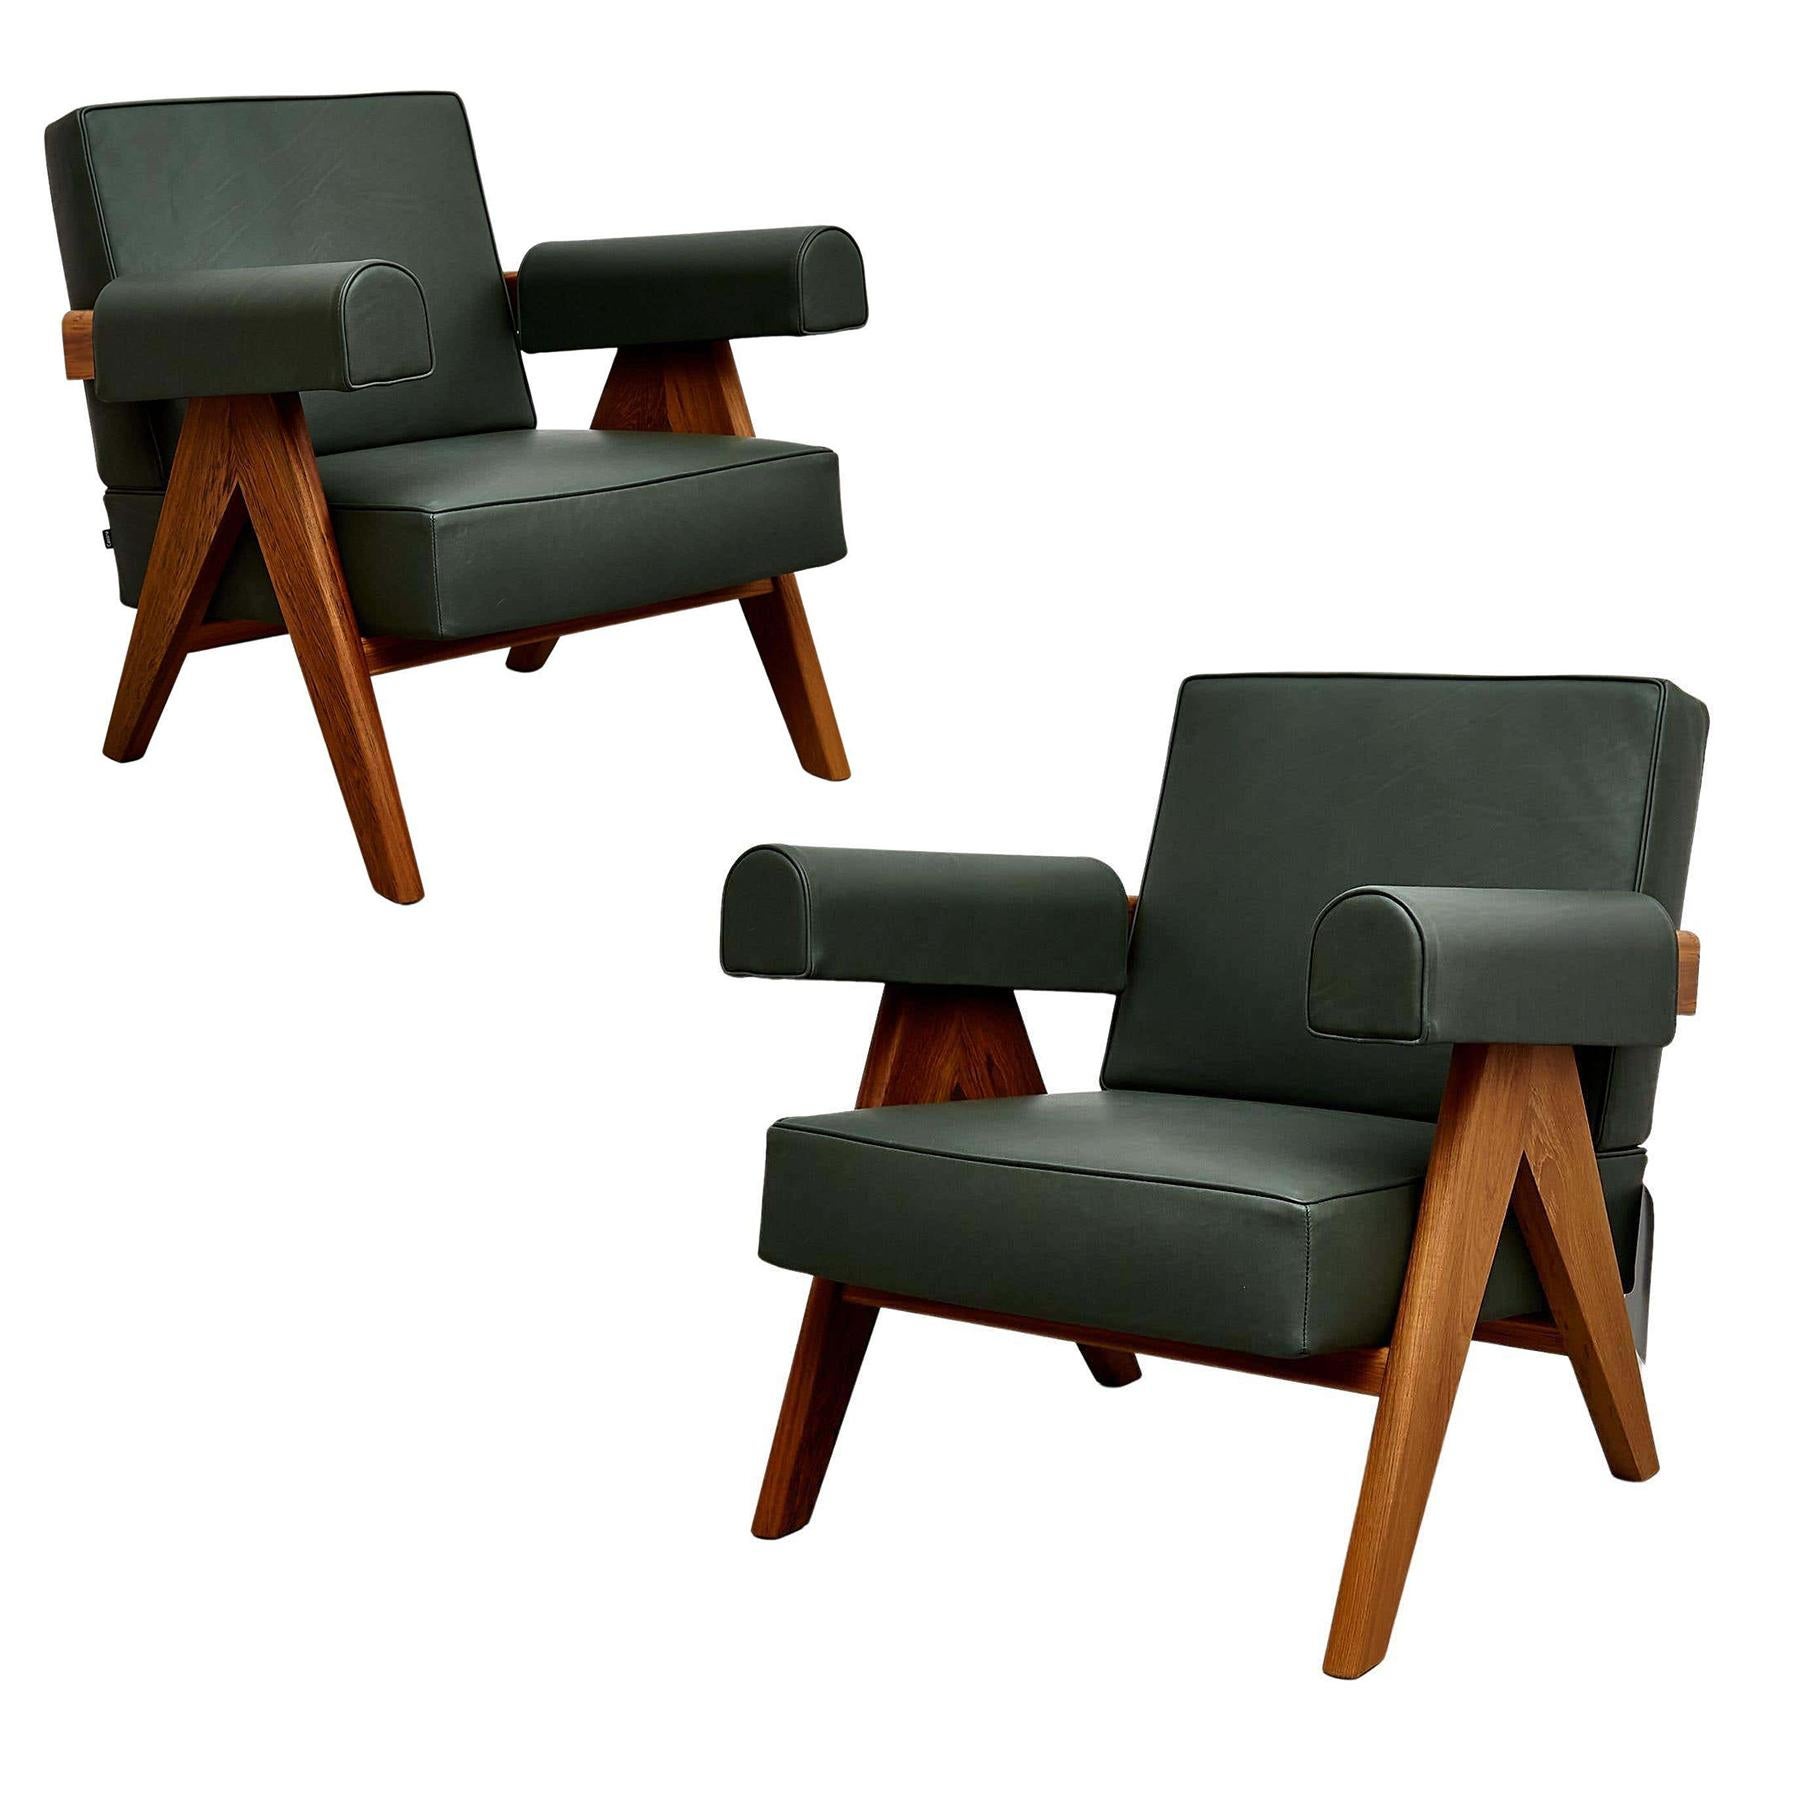 Set of Two Pierre Jeanneret Teak Wood Green Leather Armchair by Cassina In New Condition For Sale In Barcelona, Barcelona